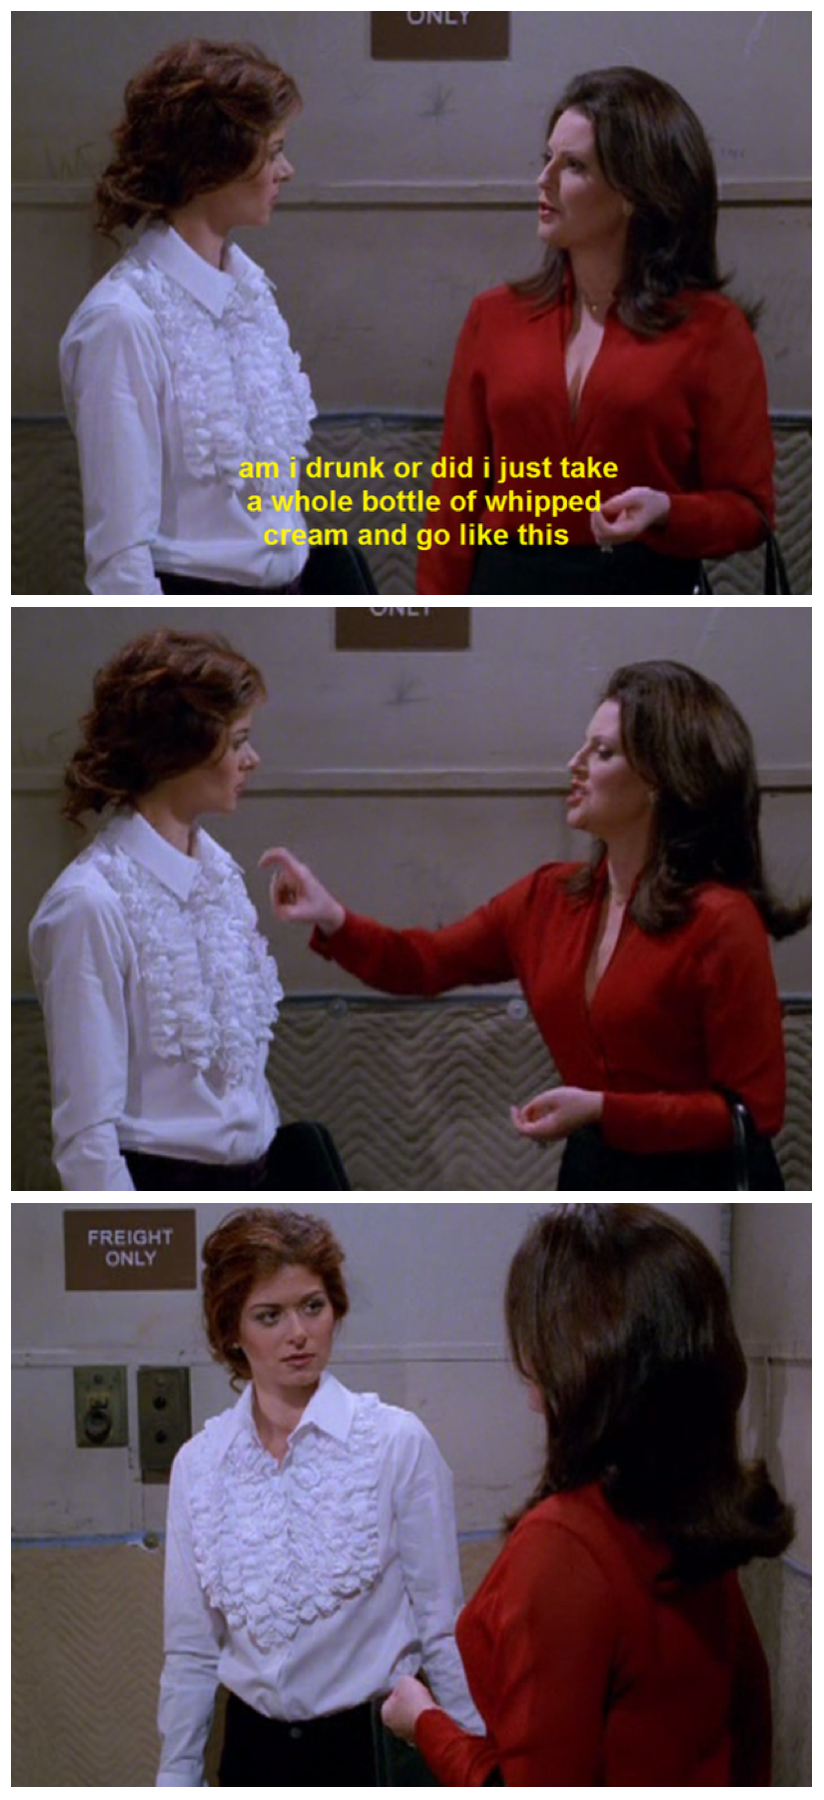 Funny Will and Grace meme about that puffy shirt that looks like it is covered in whipped cream